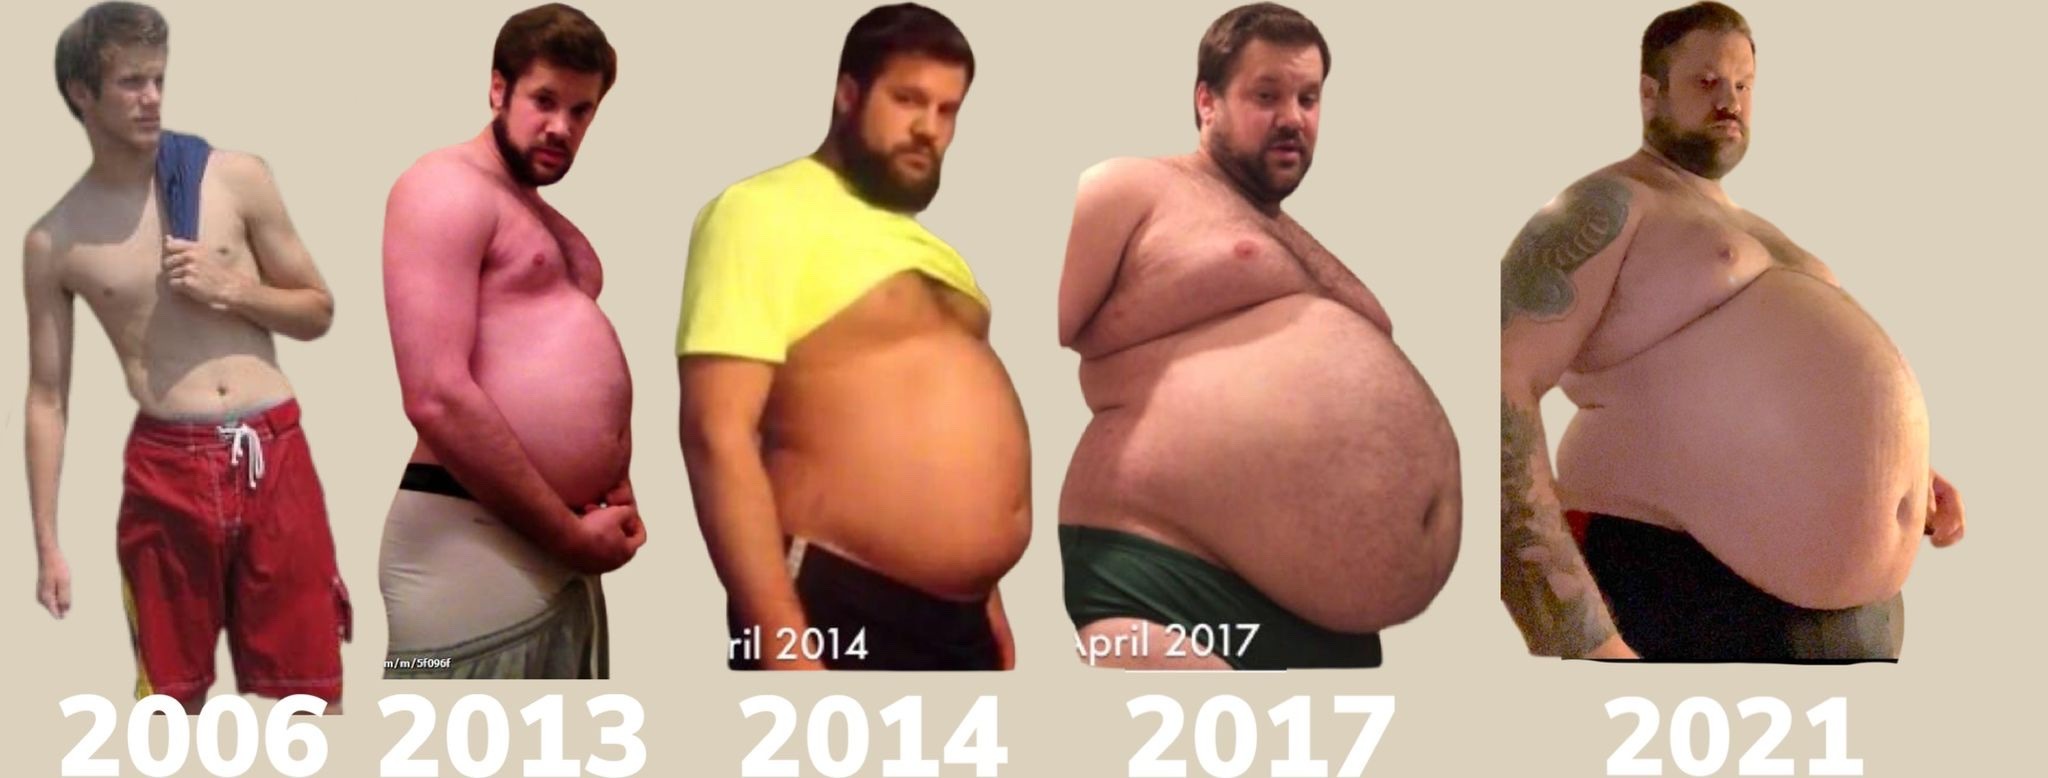 Sex thatonebigchub:Someone became a big round pictures